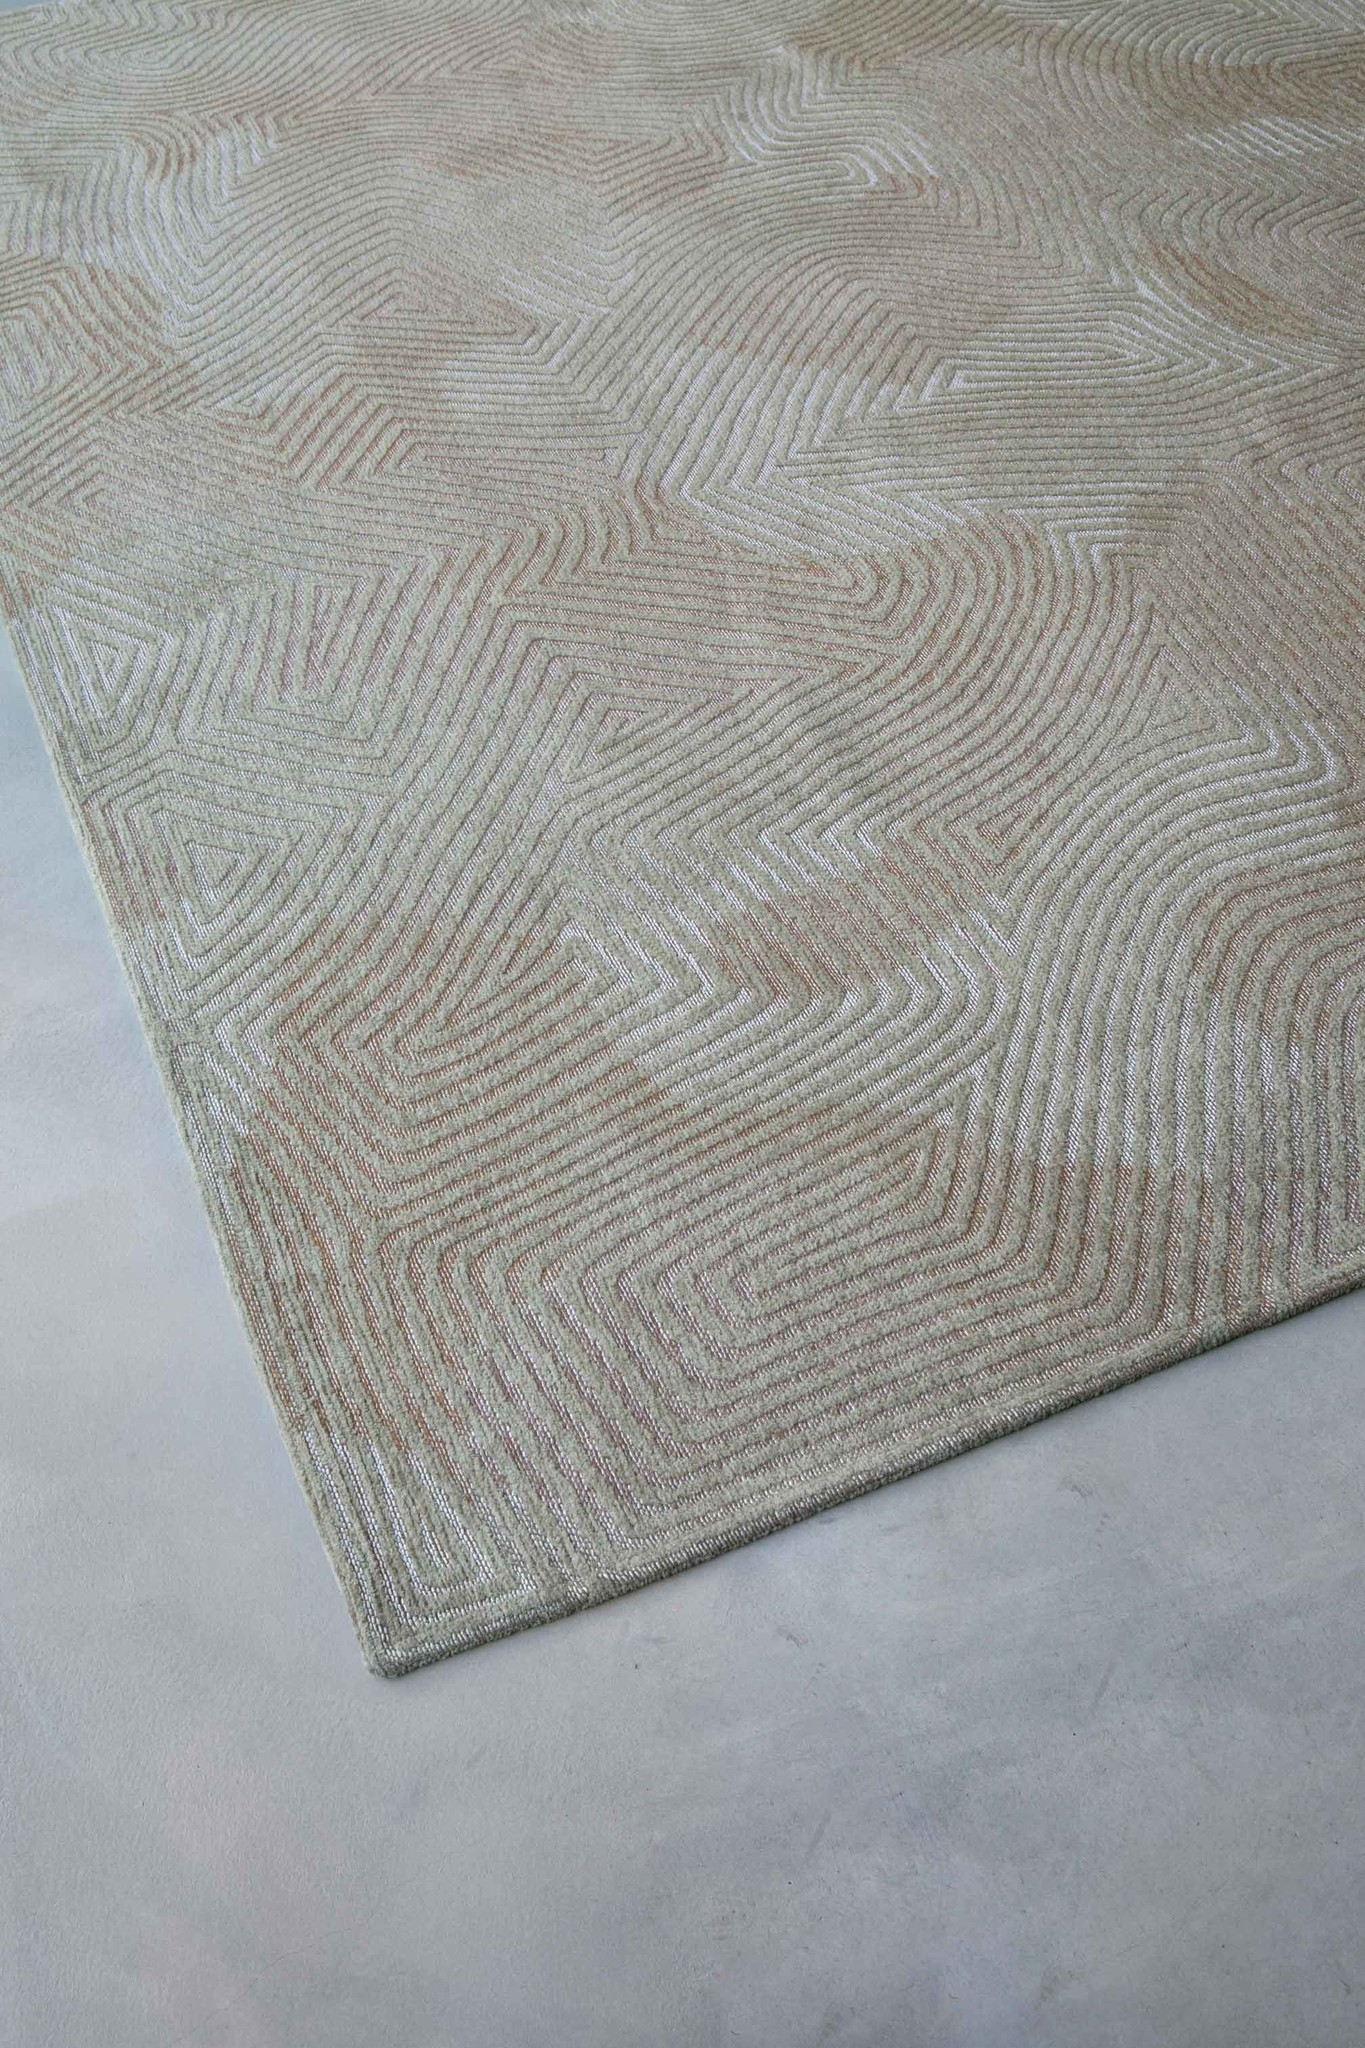 Coral - Shell Beige 9229 ☞ Size: 240 x 340 cm